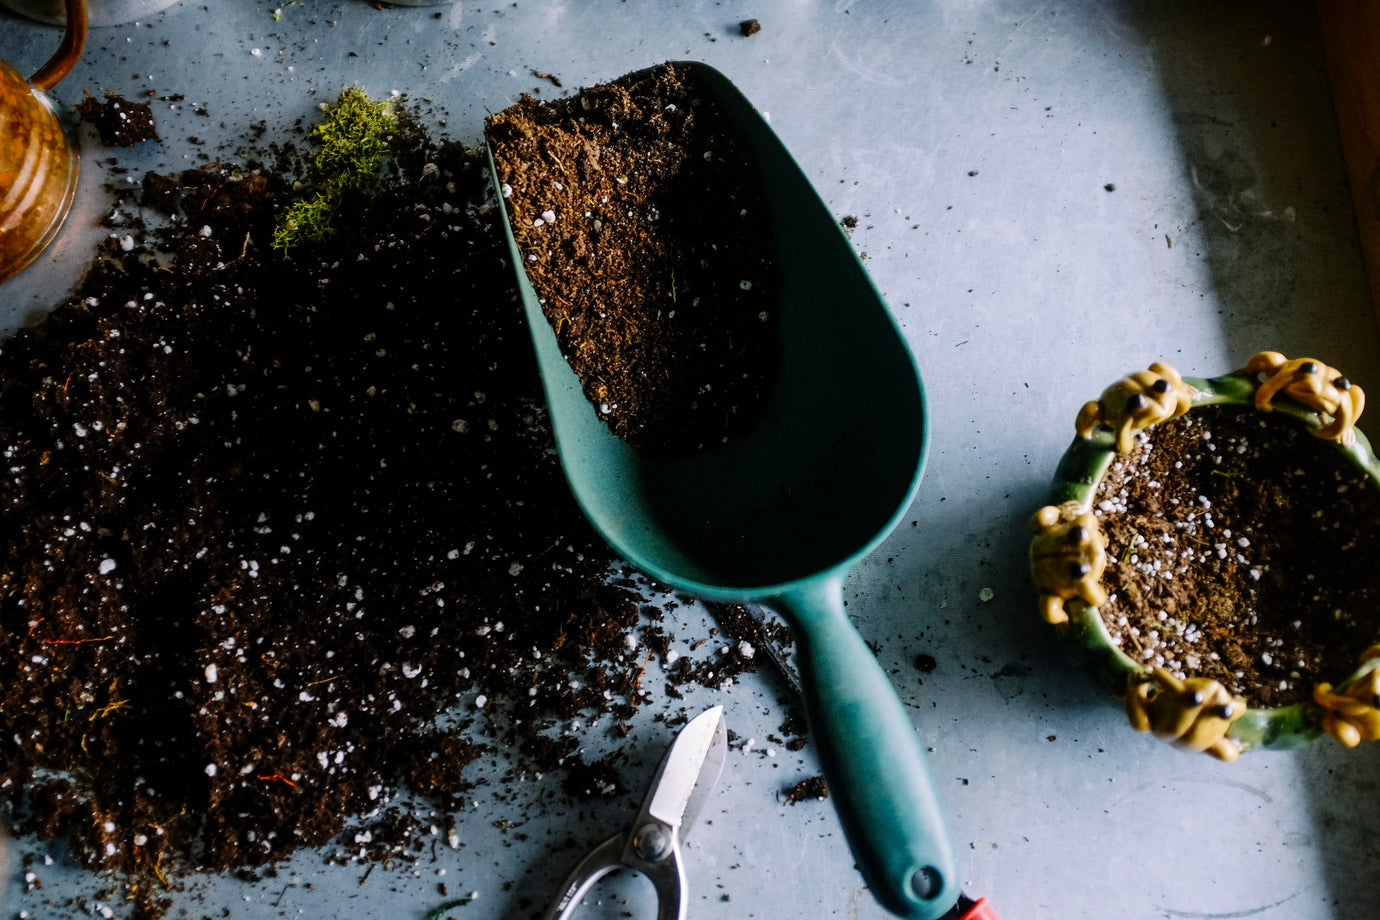 How to Compost Coffee Grounds at Home